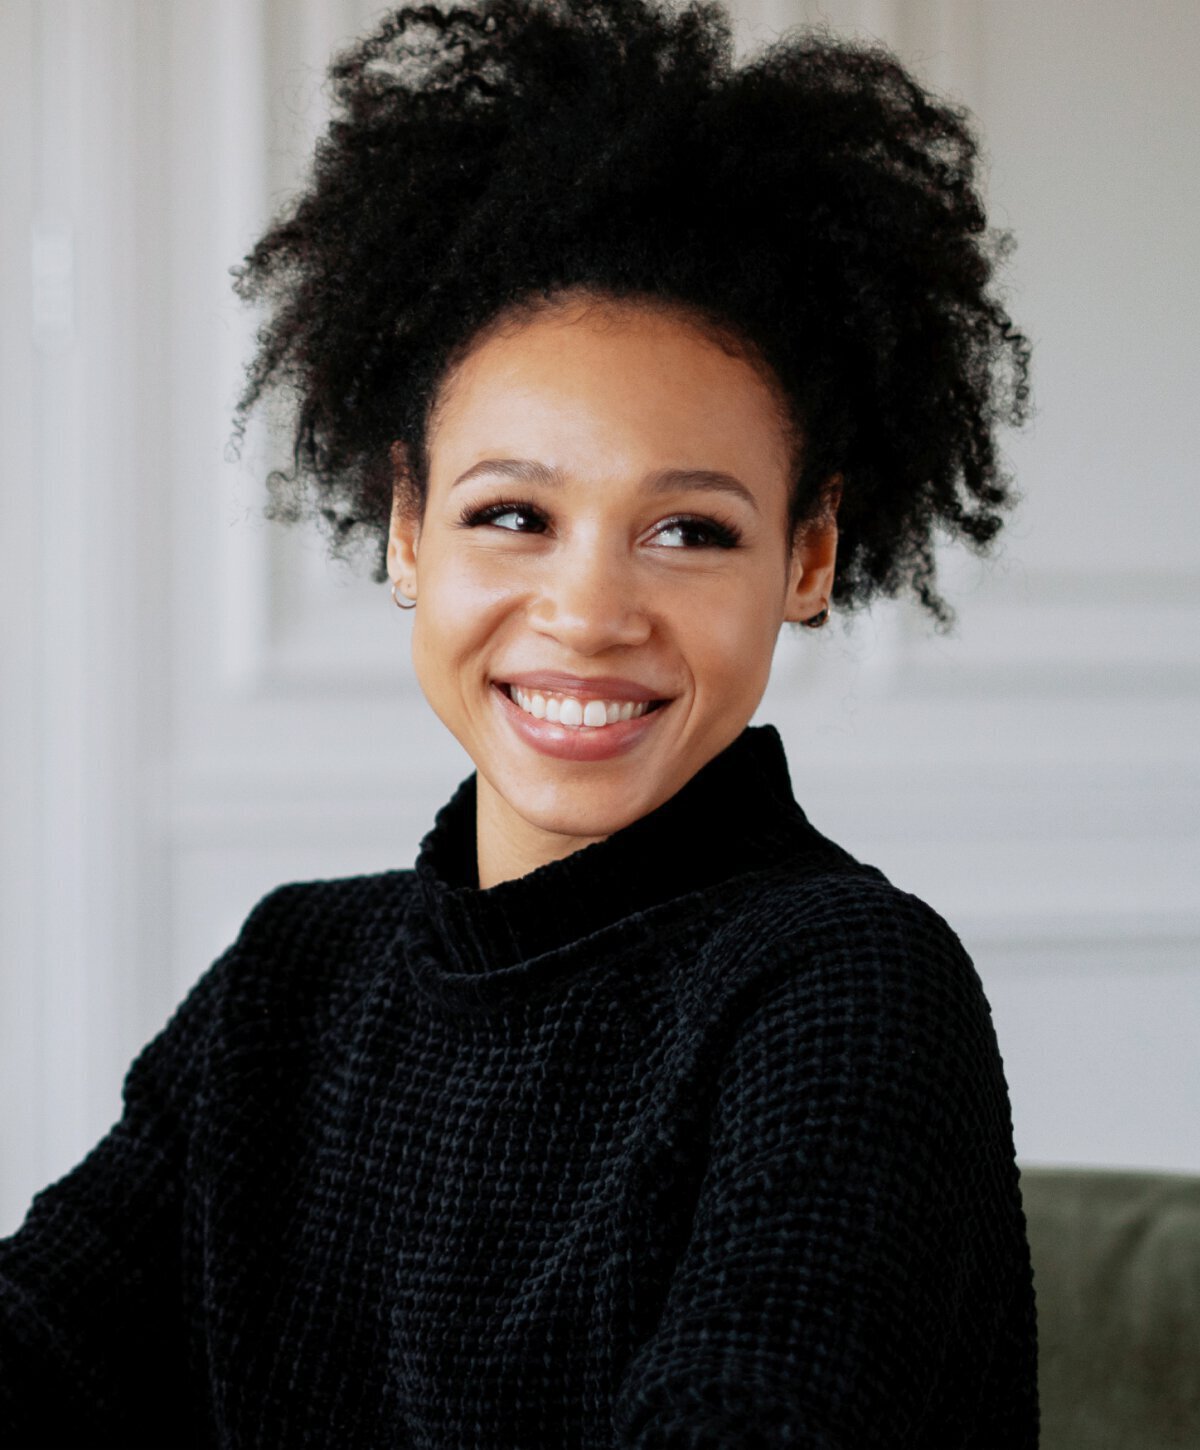 Smiling woman with curly hair up